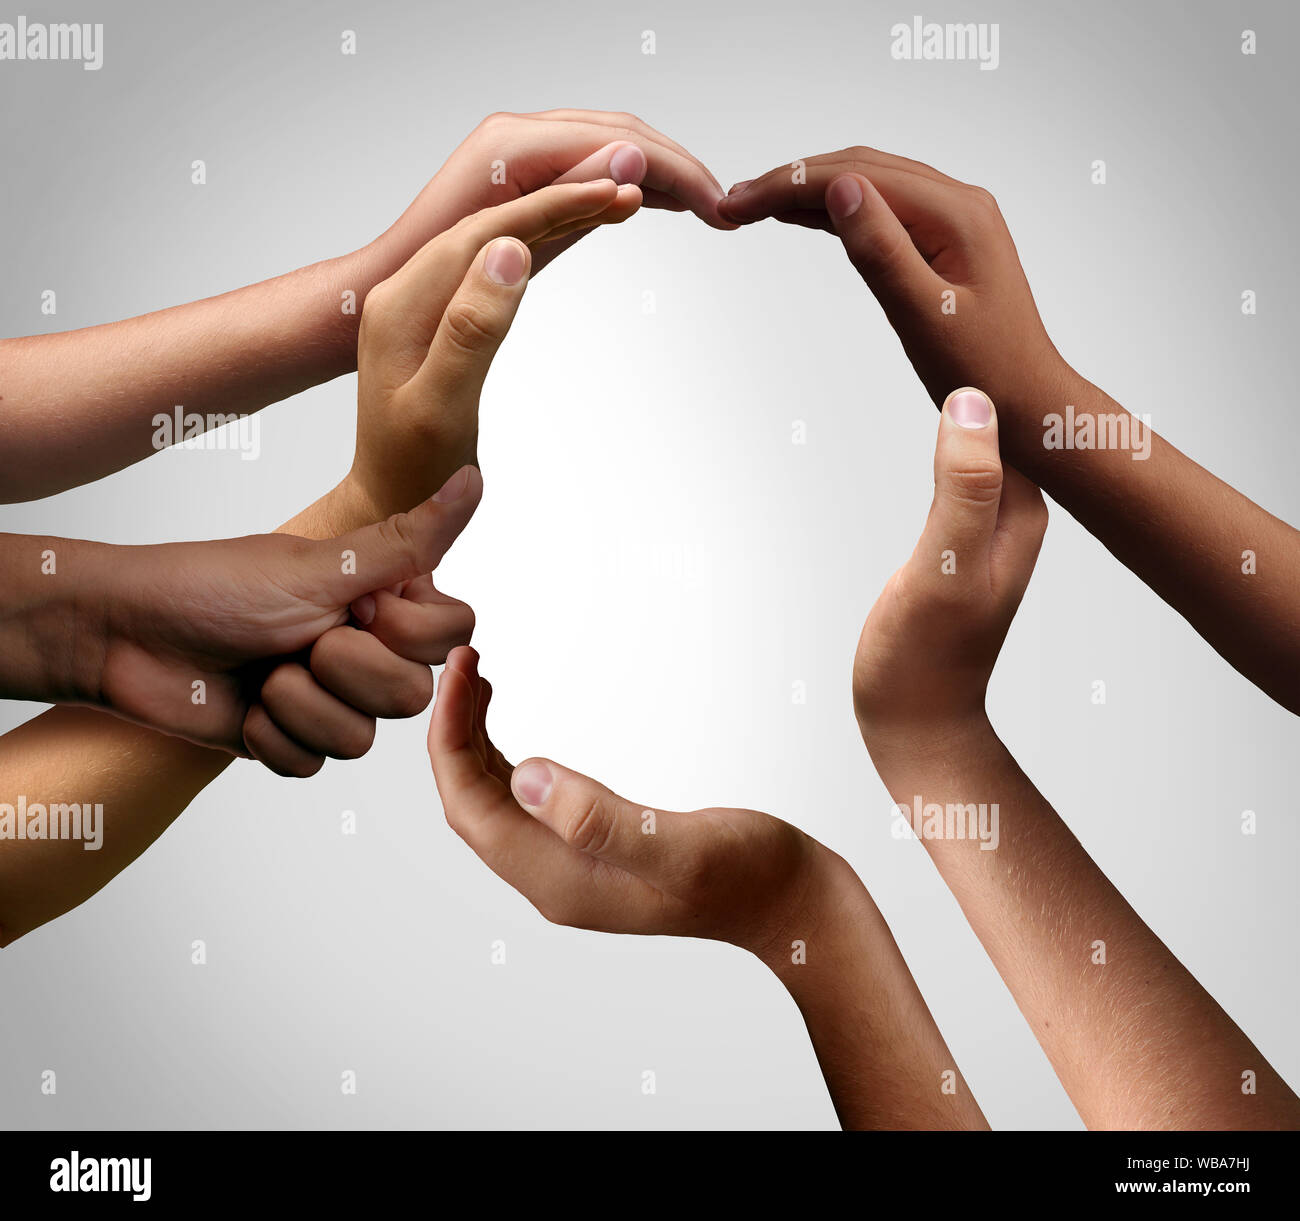 People connect as one as a business creative team made of diverse hands joining together to form one head as a group connected with hands. Stock Photo